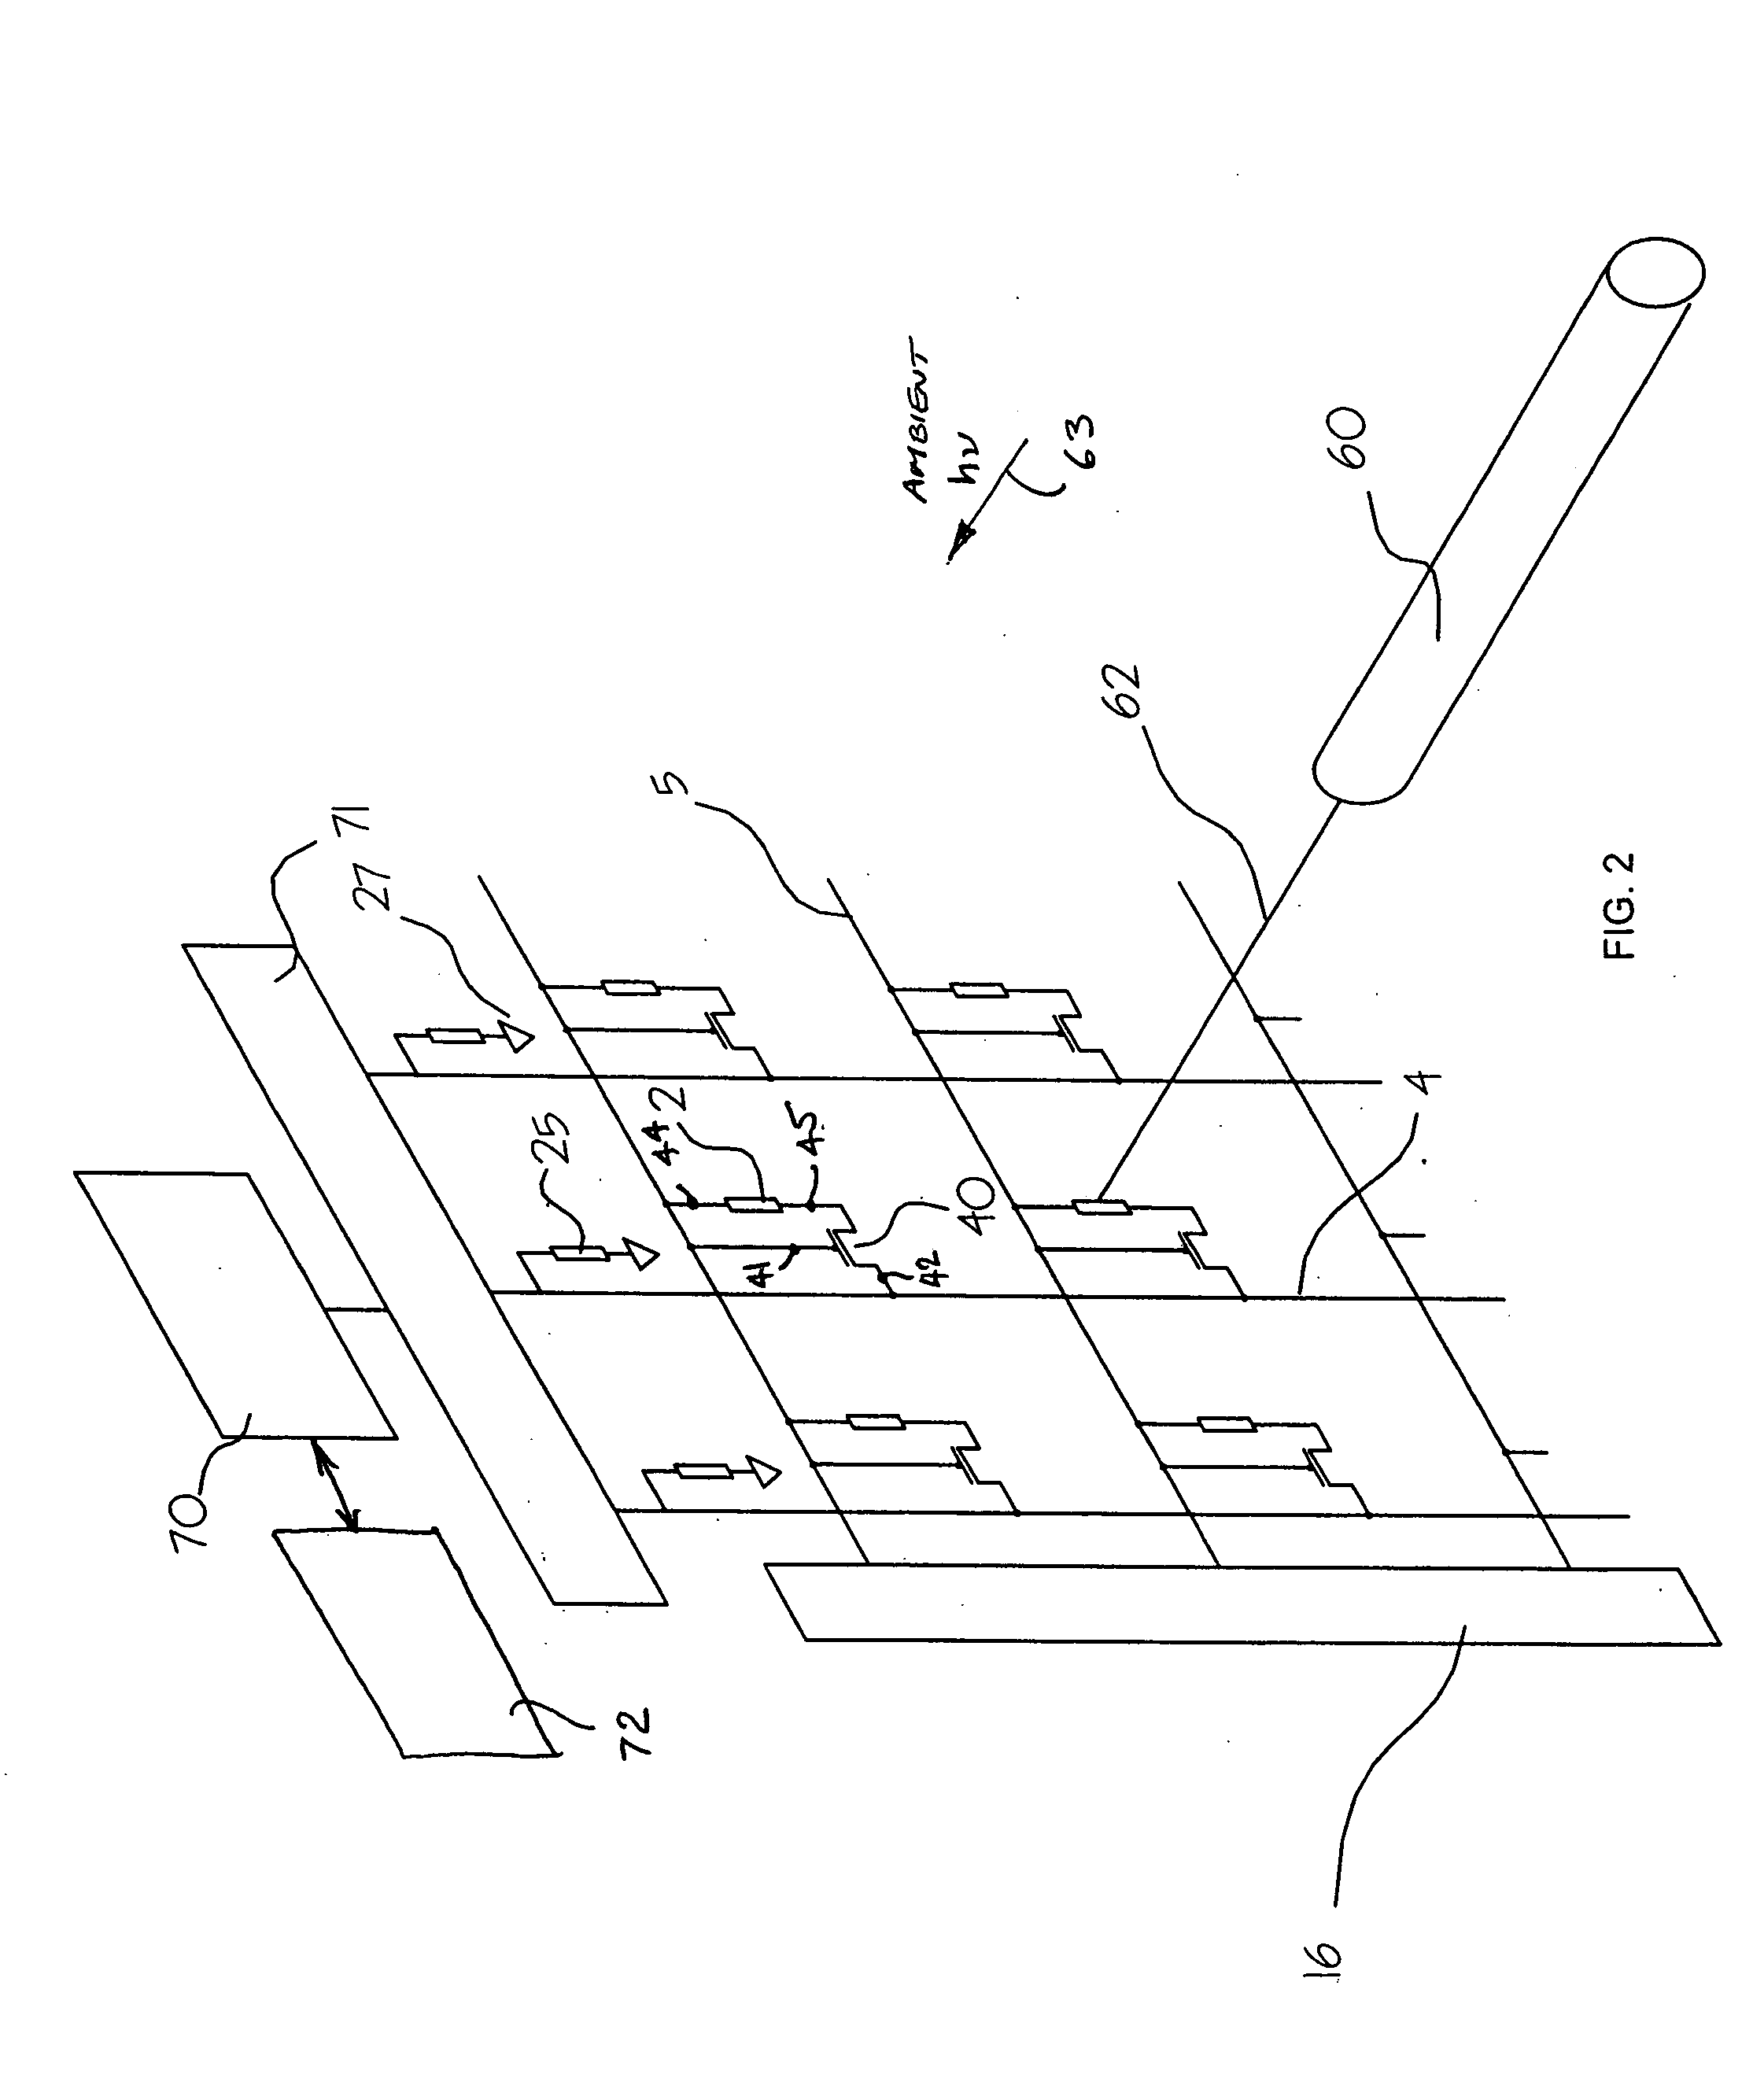 Method and device for flat panel emissive display using shielded or partially shielded sensors to detect user screen inputs